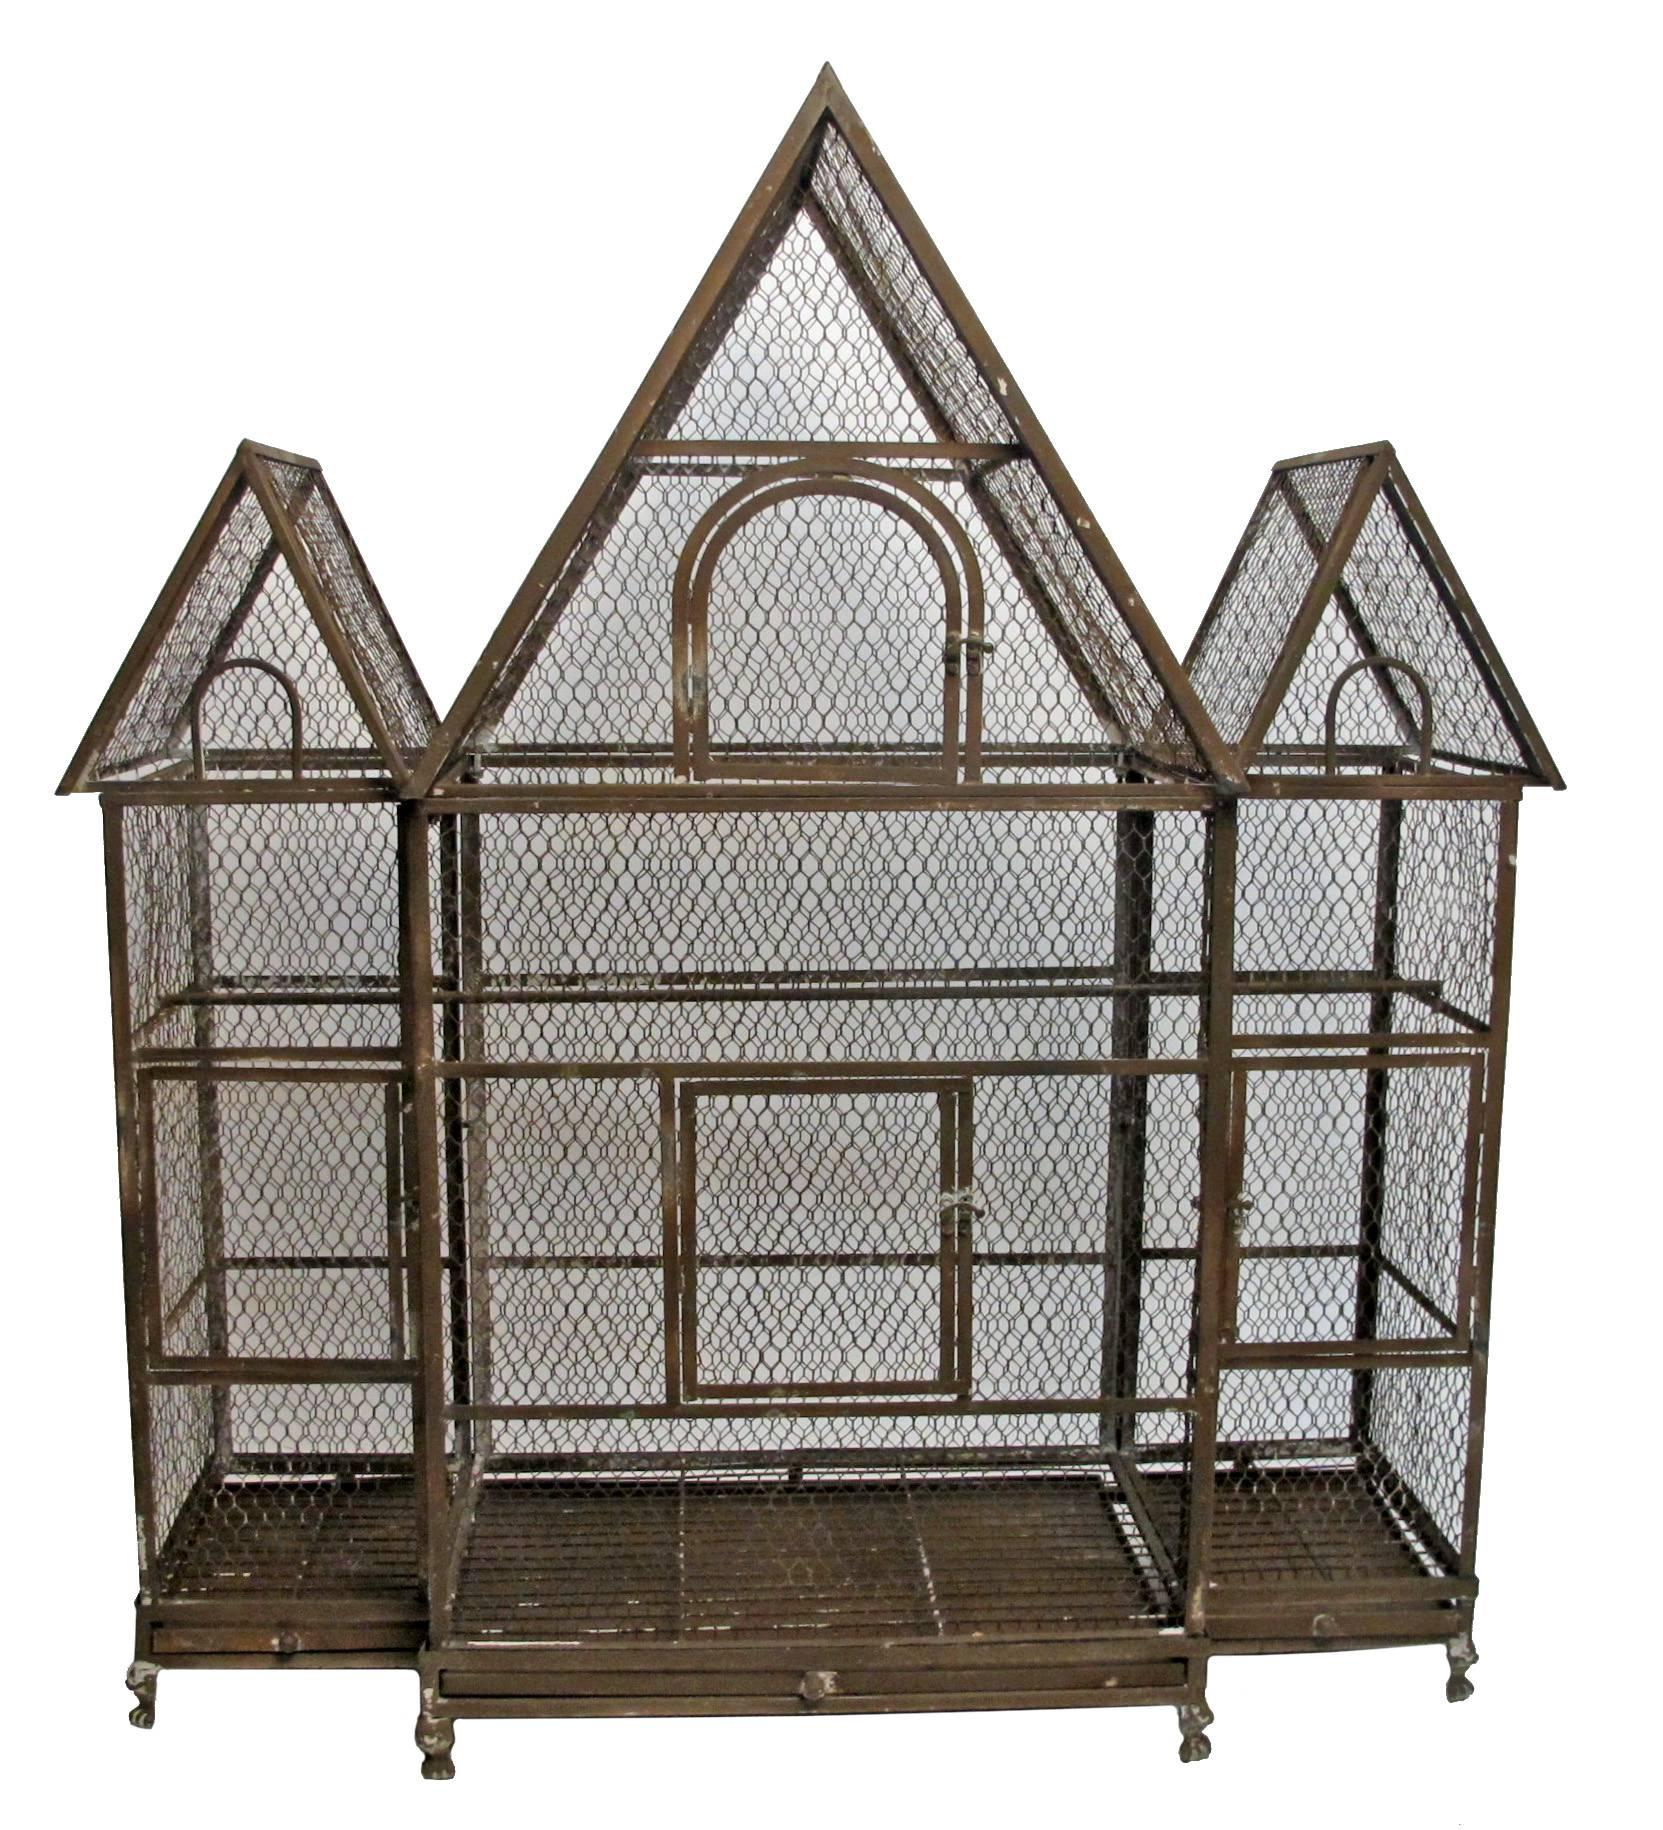 A very large architectural in shape aged tin birdcage with three slide out drawers at the bottom and having remnants of old paint. American, early 20th century.